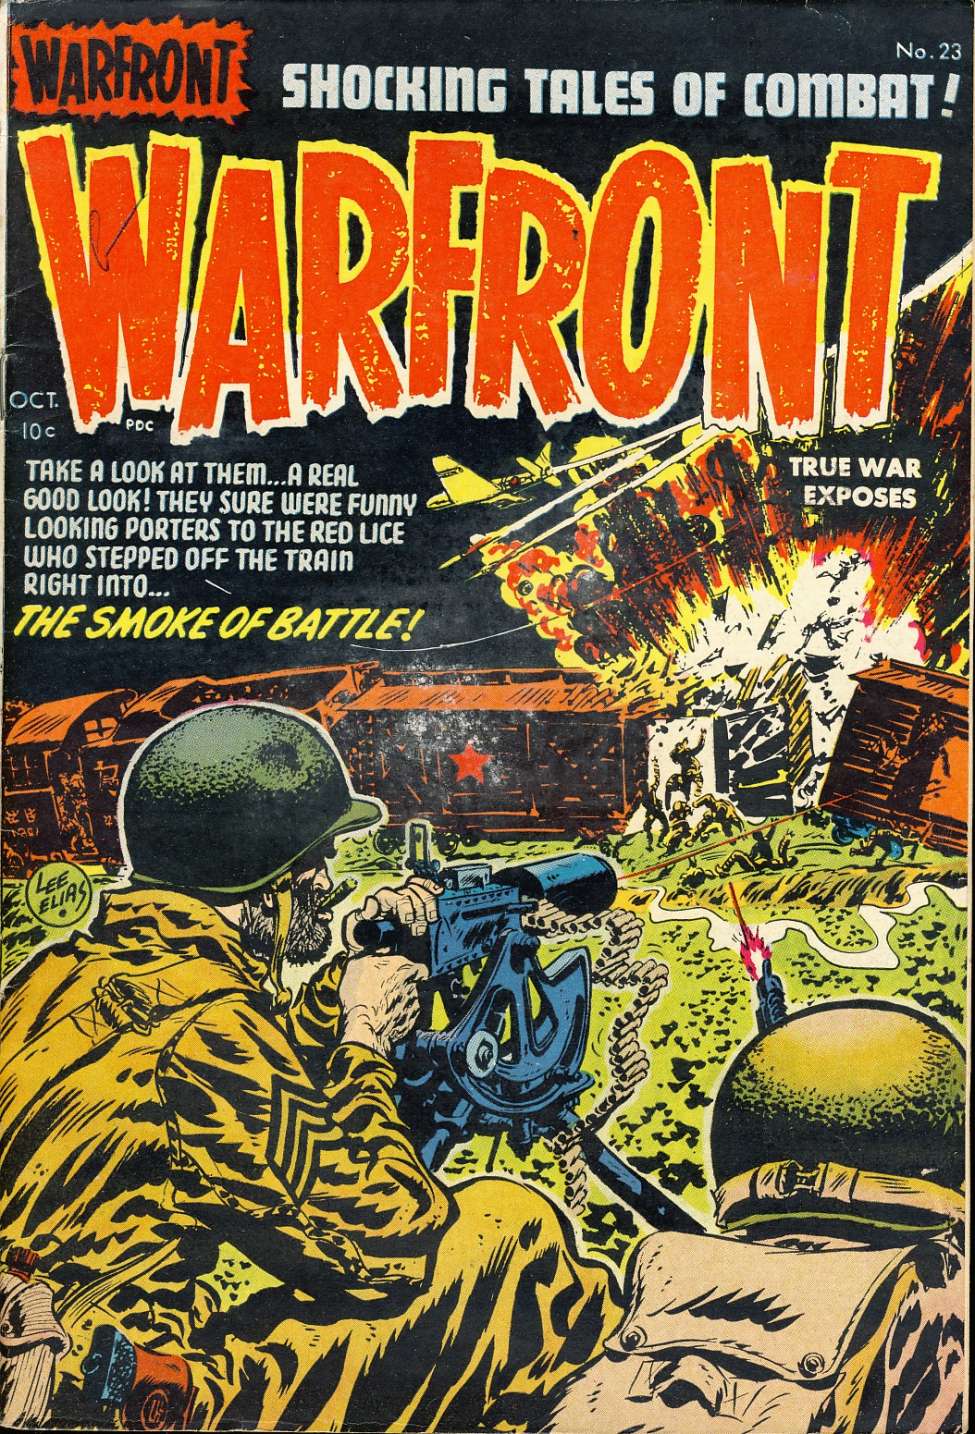 Book Cover For Warfront 23